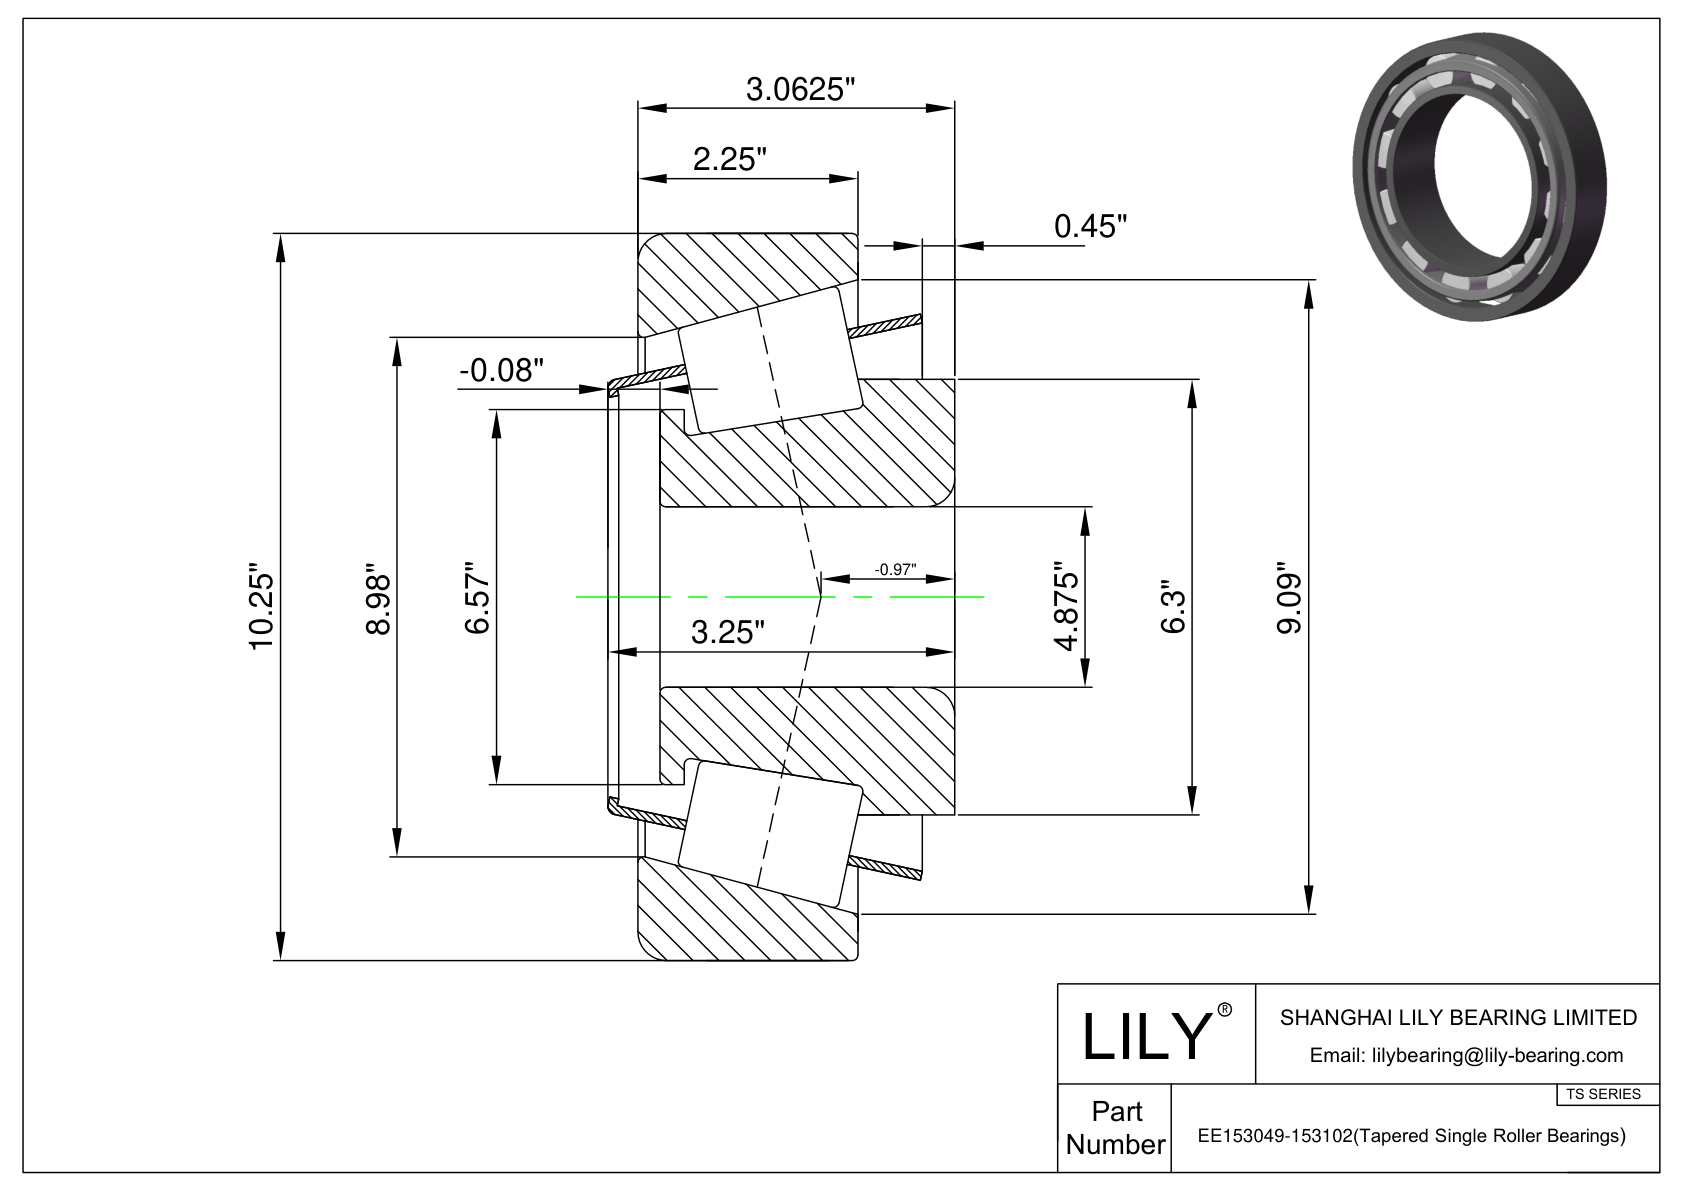 EE153049-153102 TS (Tapered Single Roller Bearings) (Imperial) cad drawing